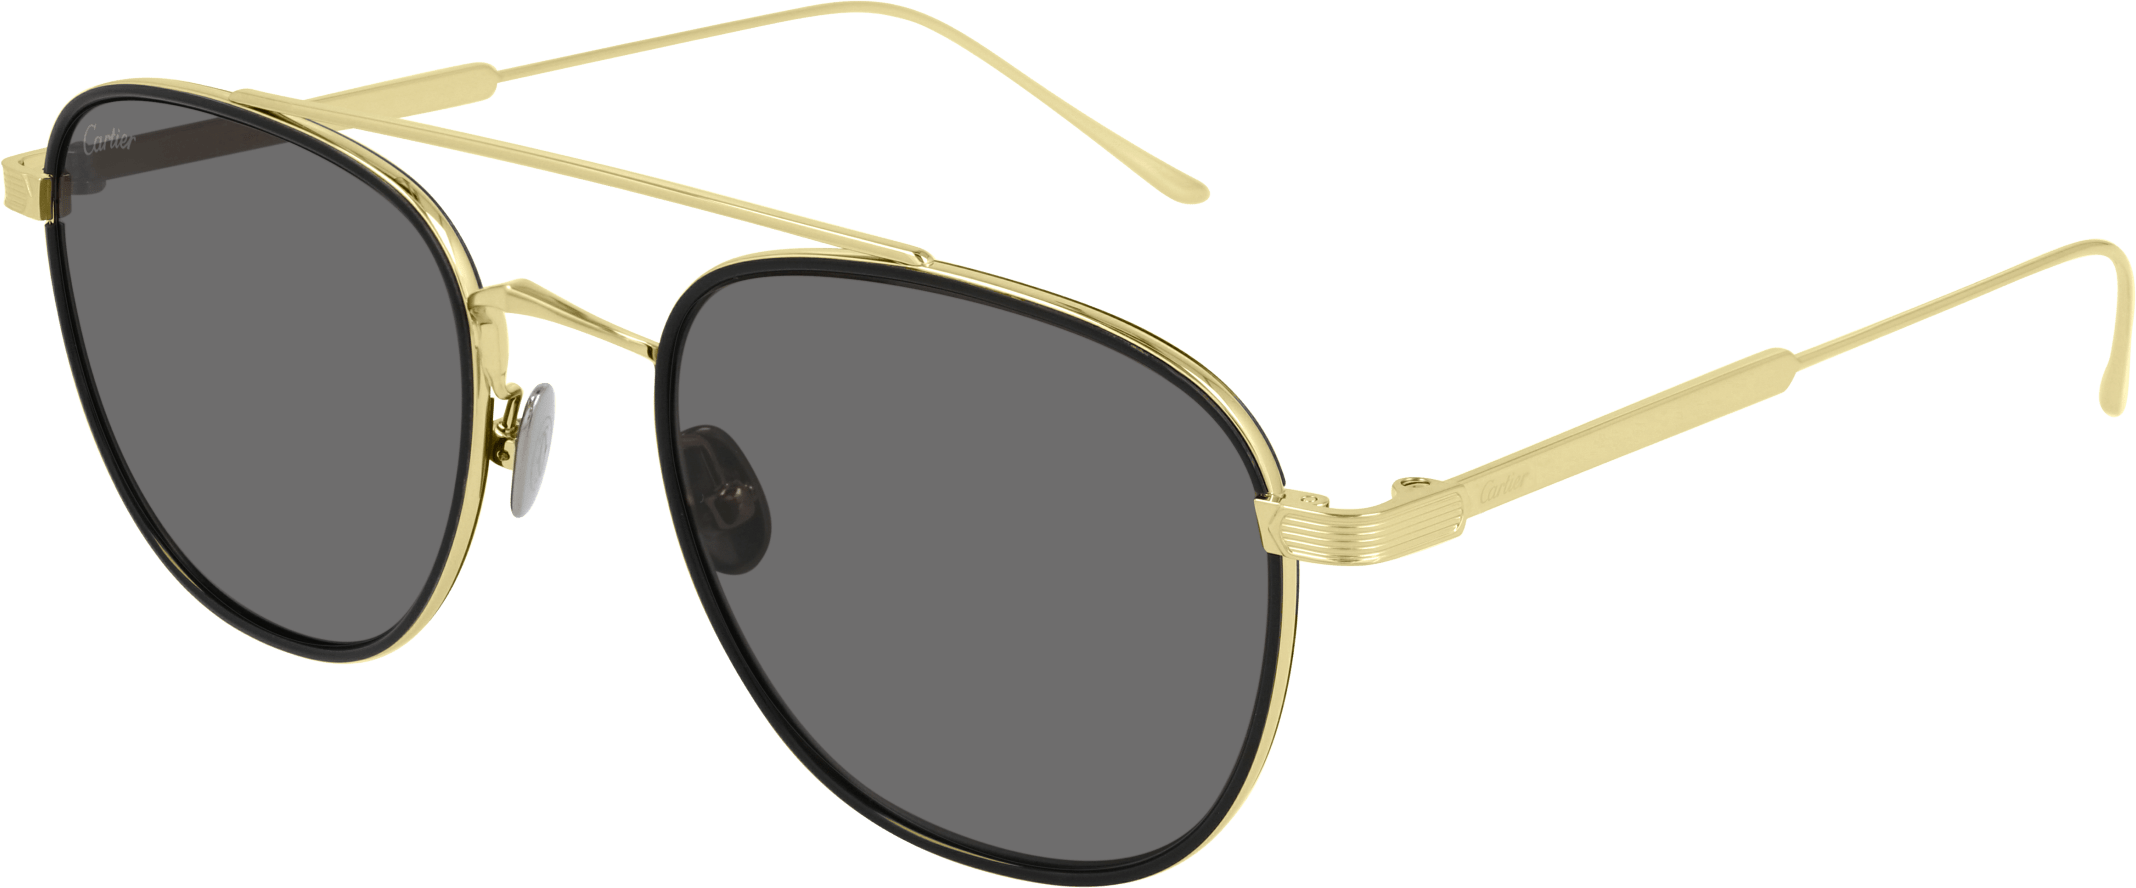 Color_CT0251S-005 - GOLD - GREY - AR (ANTI REFLECTIVE)